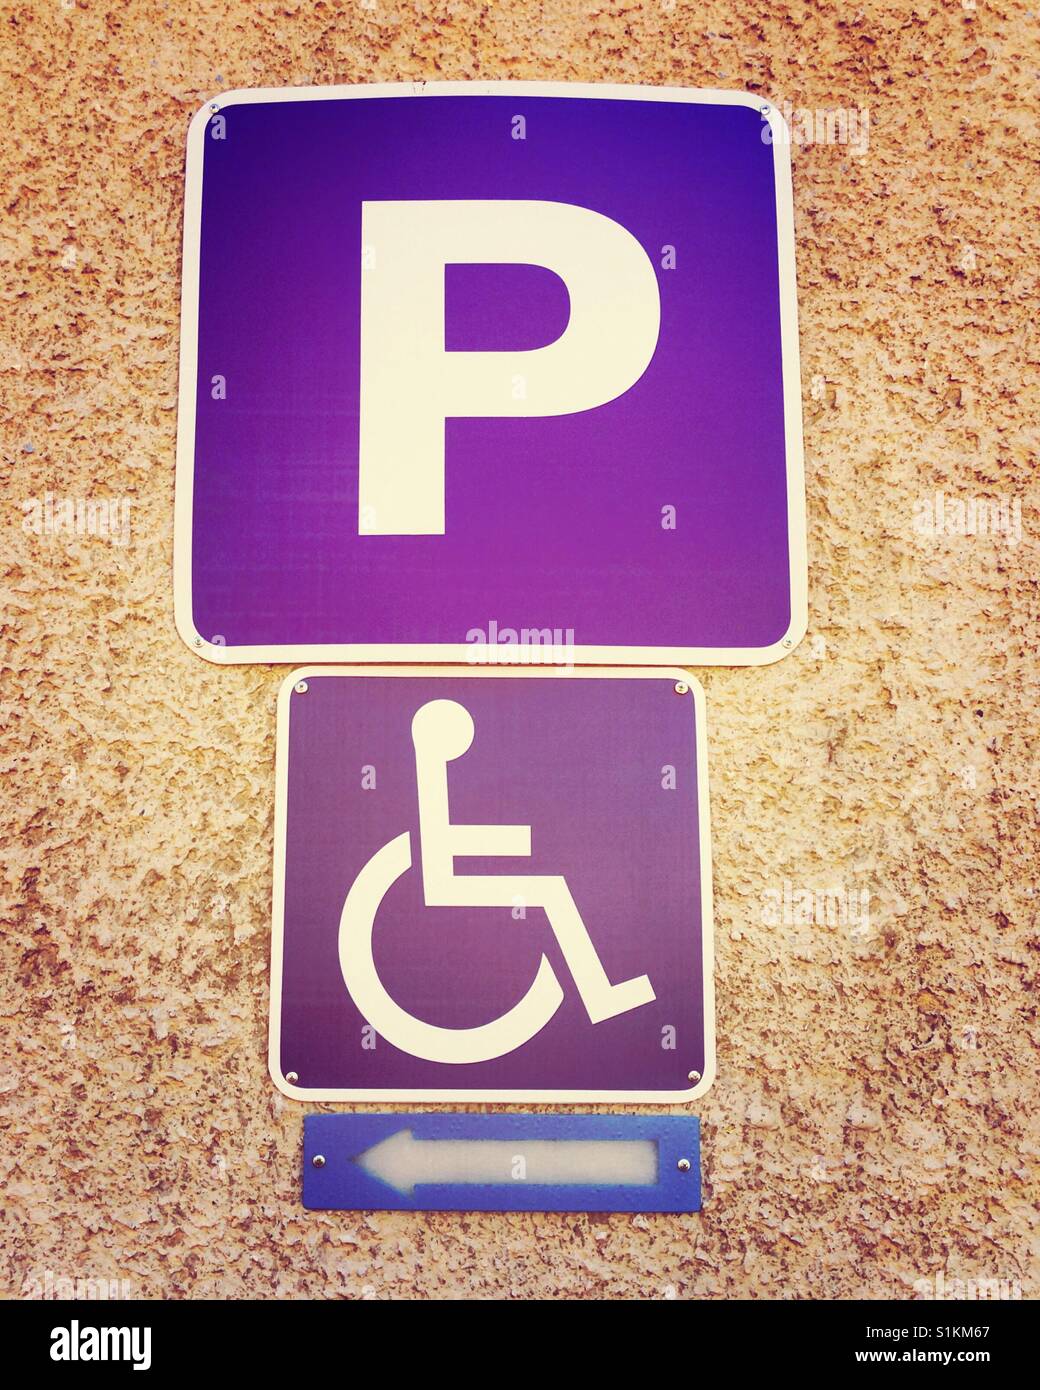 Disabled parking signs Stock Photo